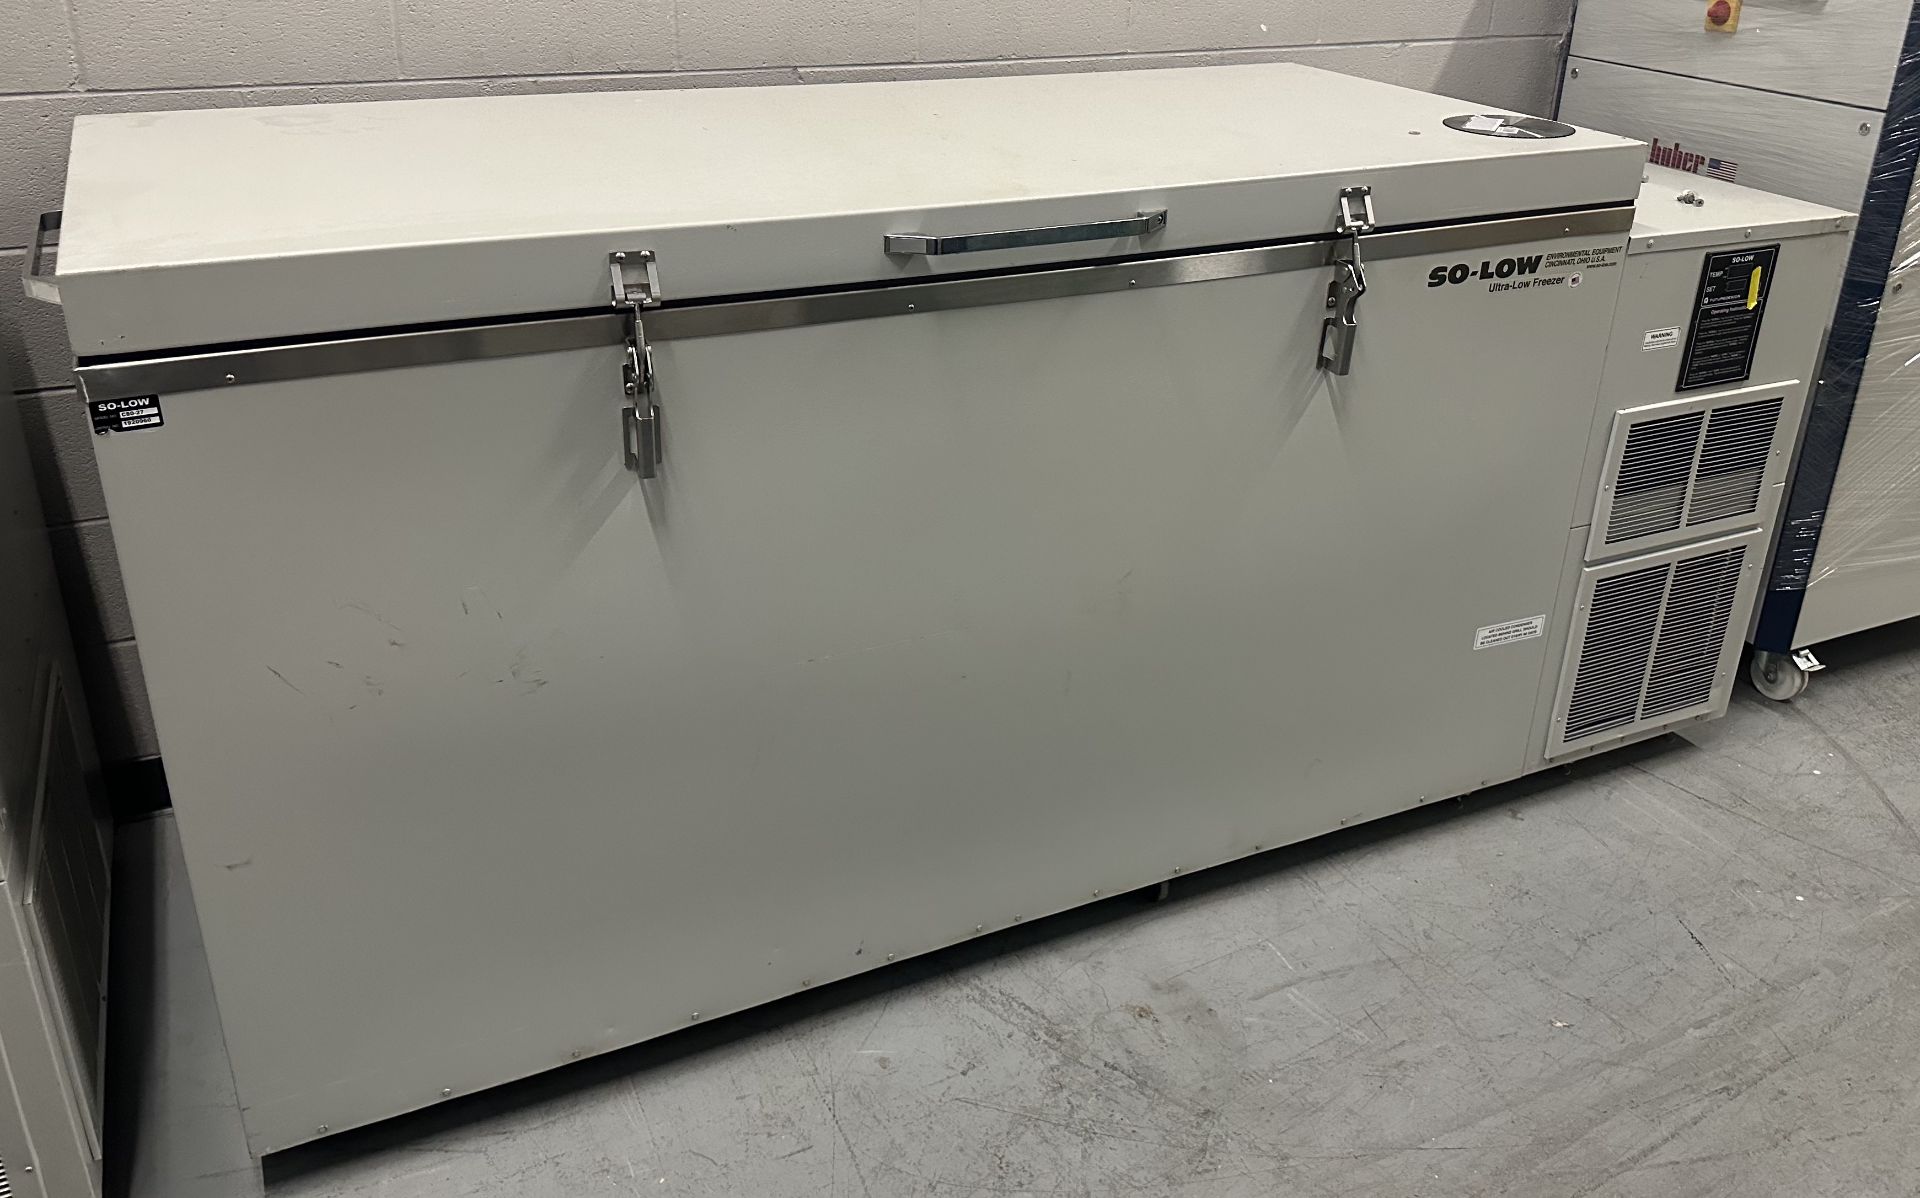 Lot of (3) Used So-Low Explosion Proof Chest-Style Freezer. Model C80-27